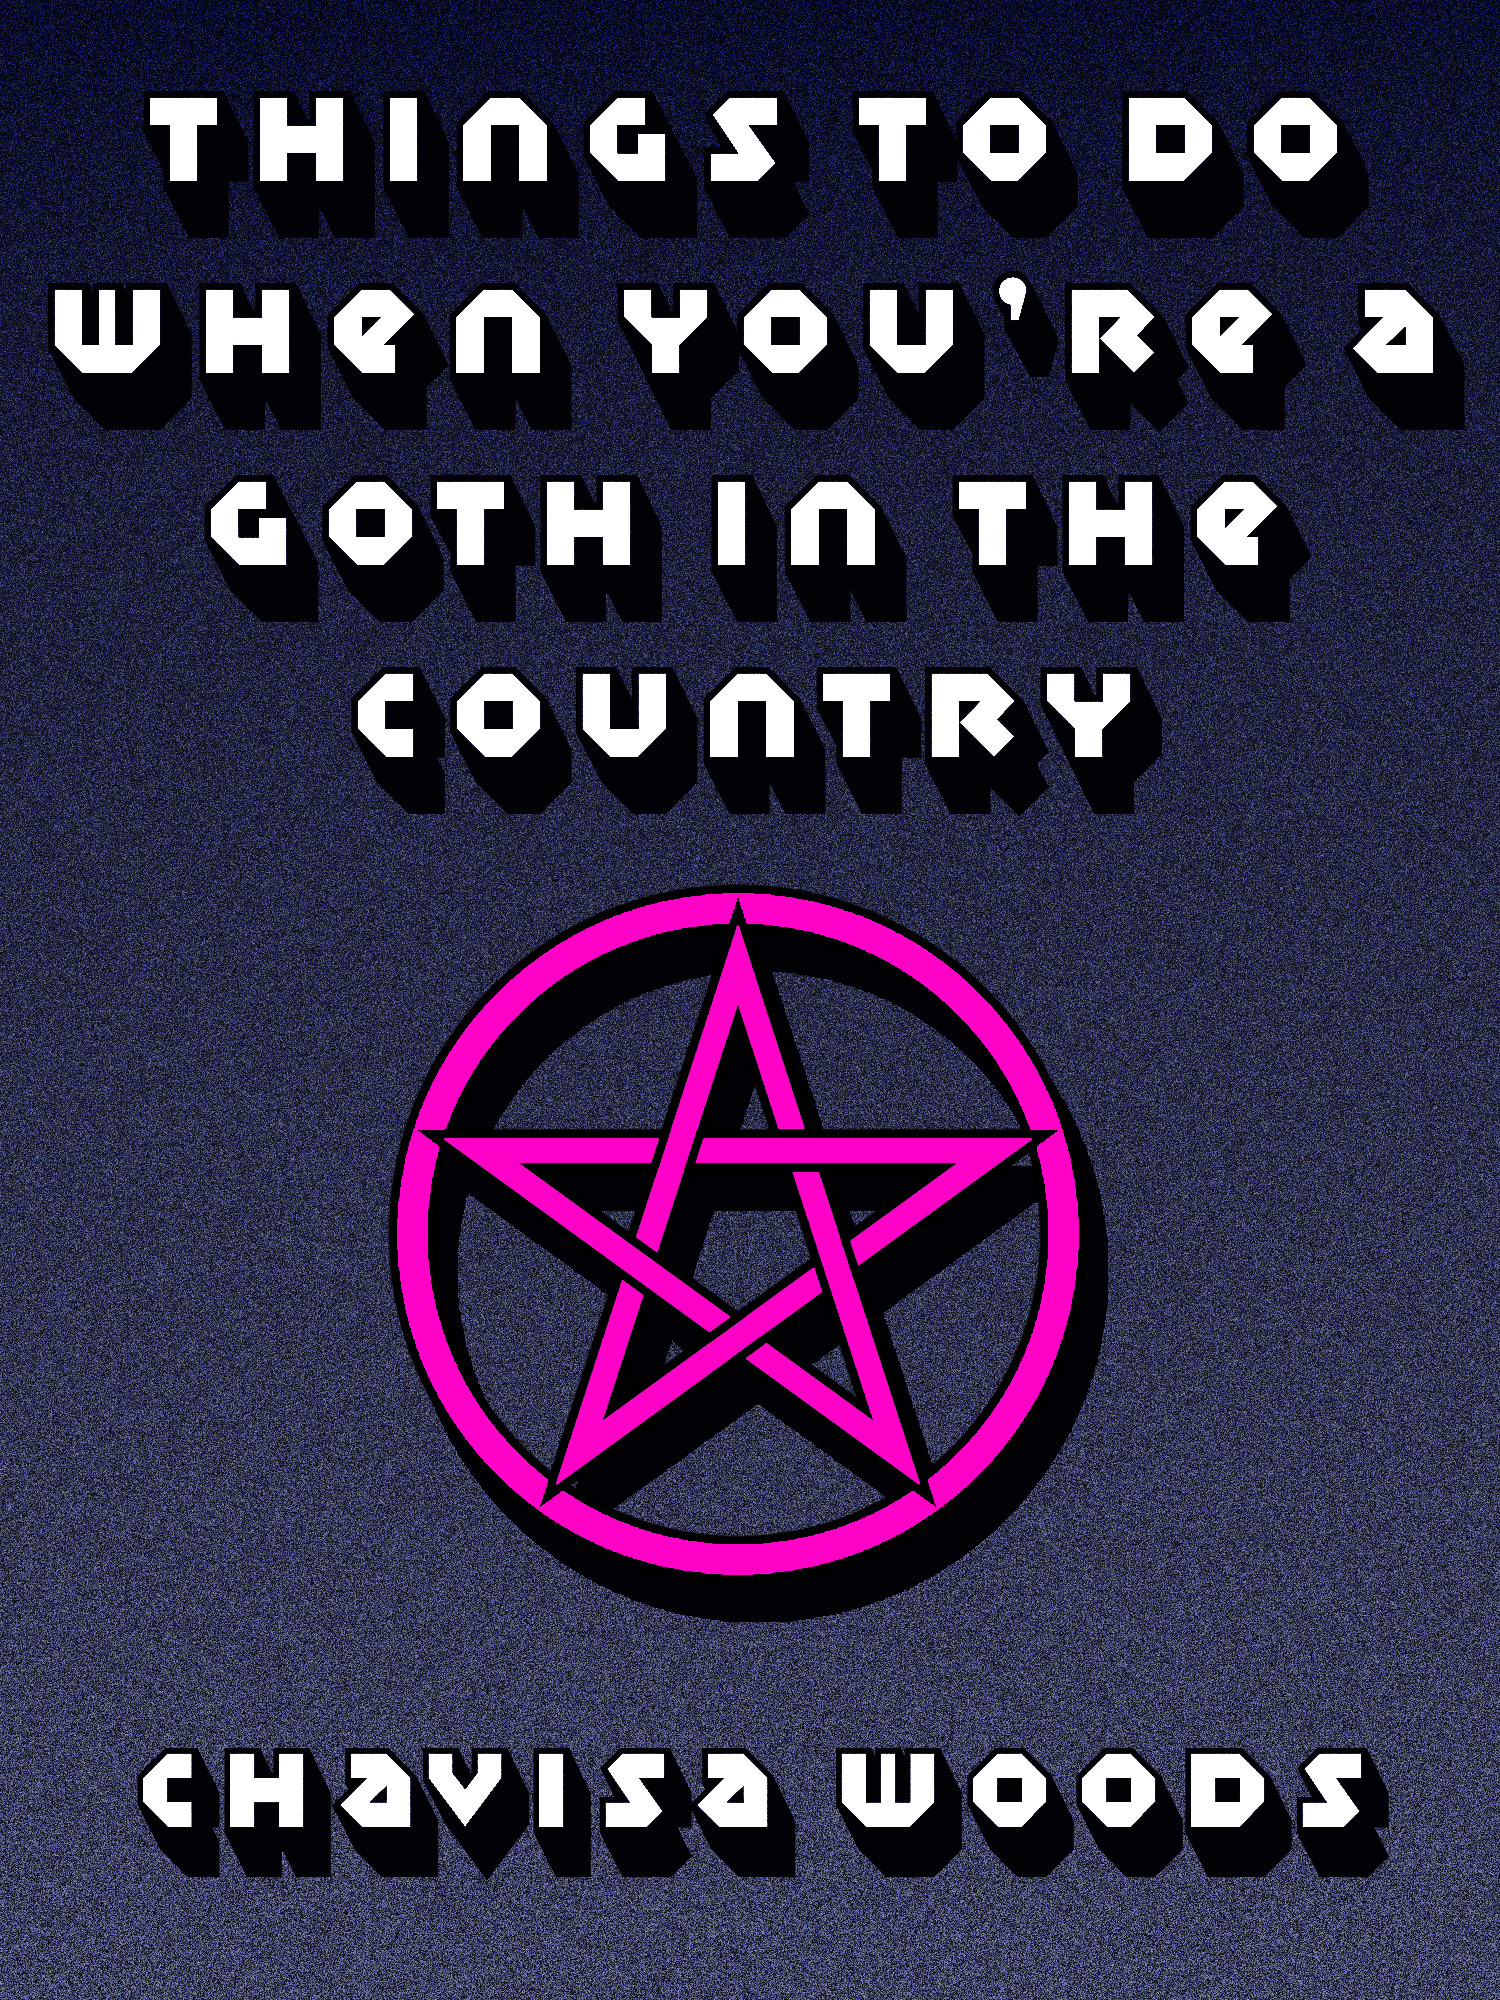 book cover chavisa woods goth in country